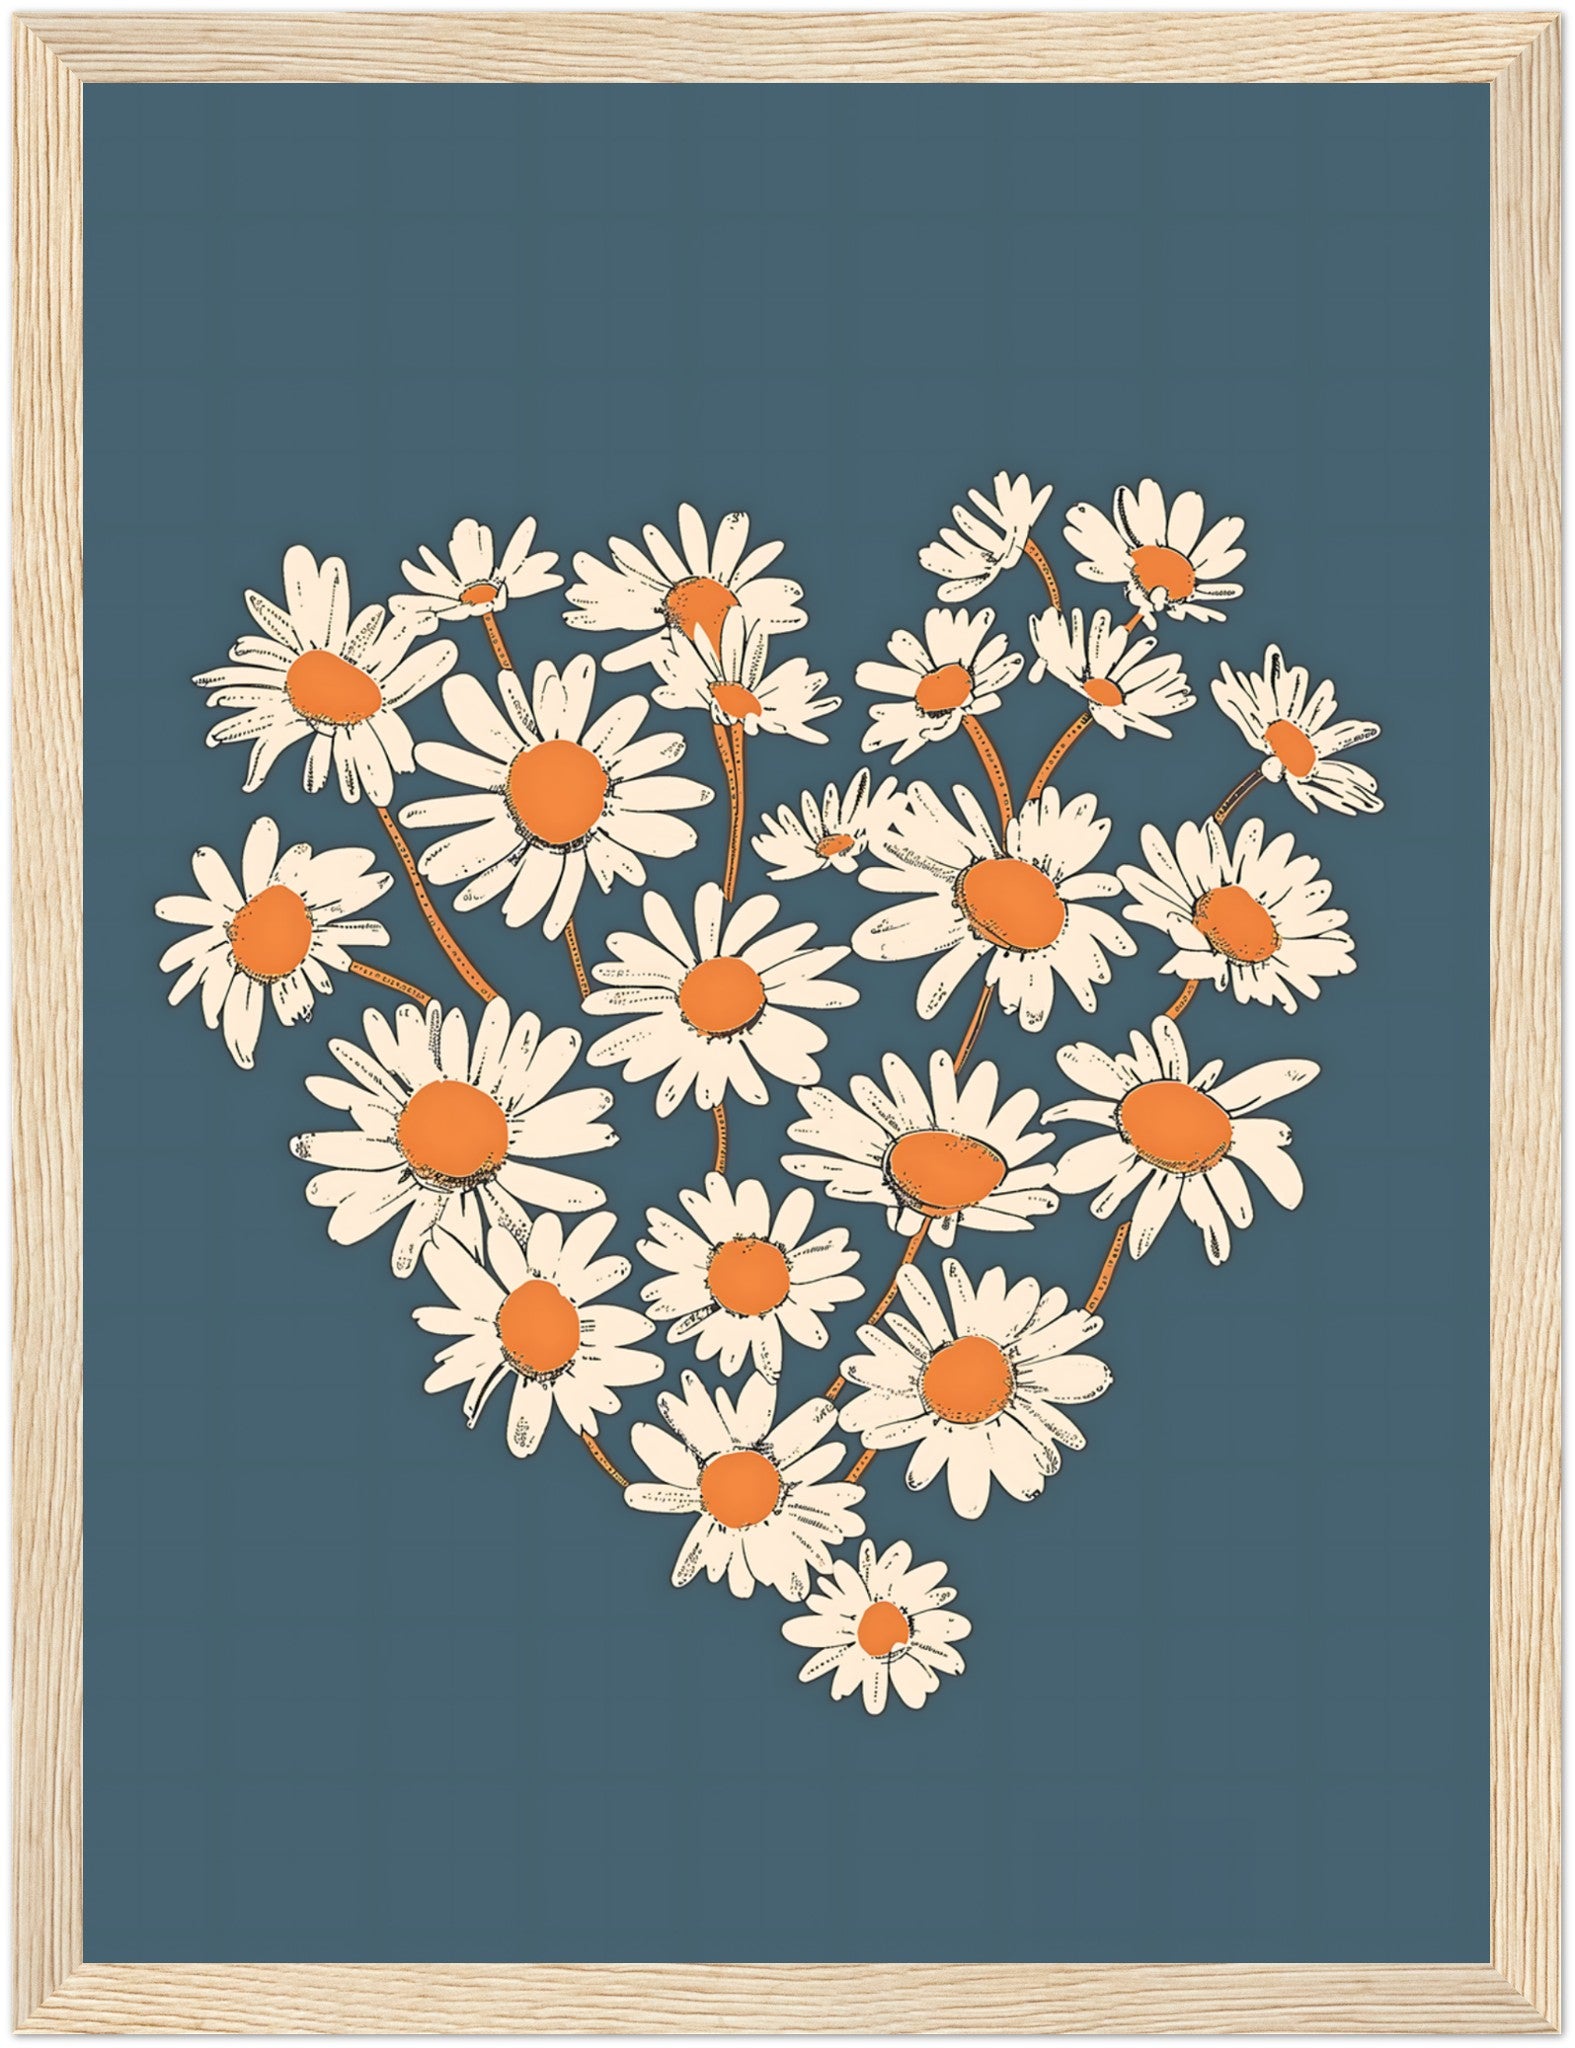 A heart shape formed by white and orange daisies against a blue background.